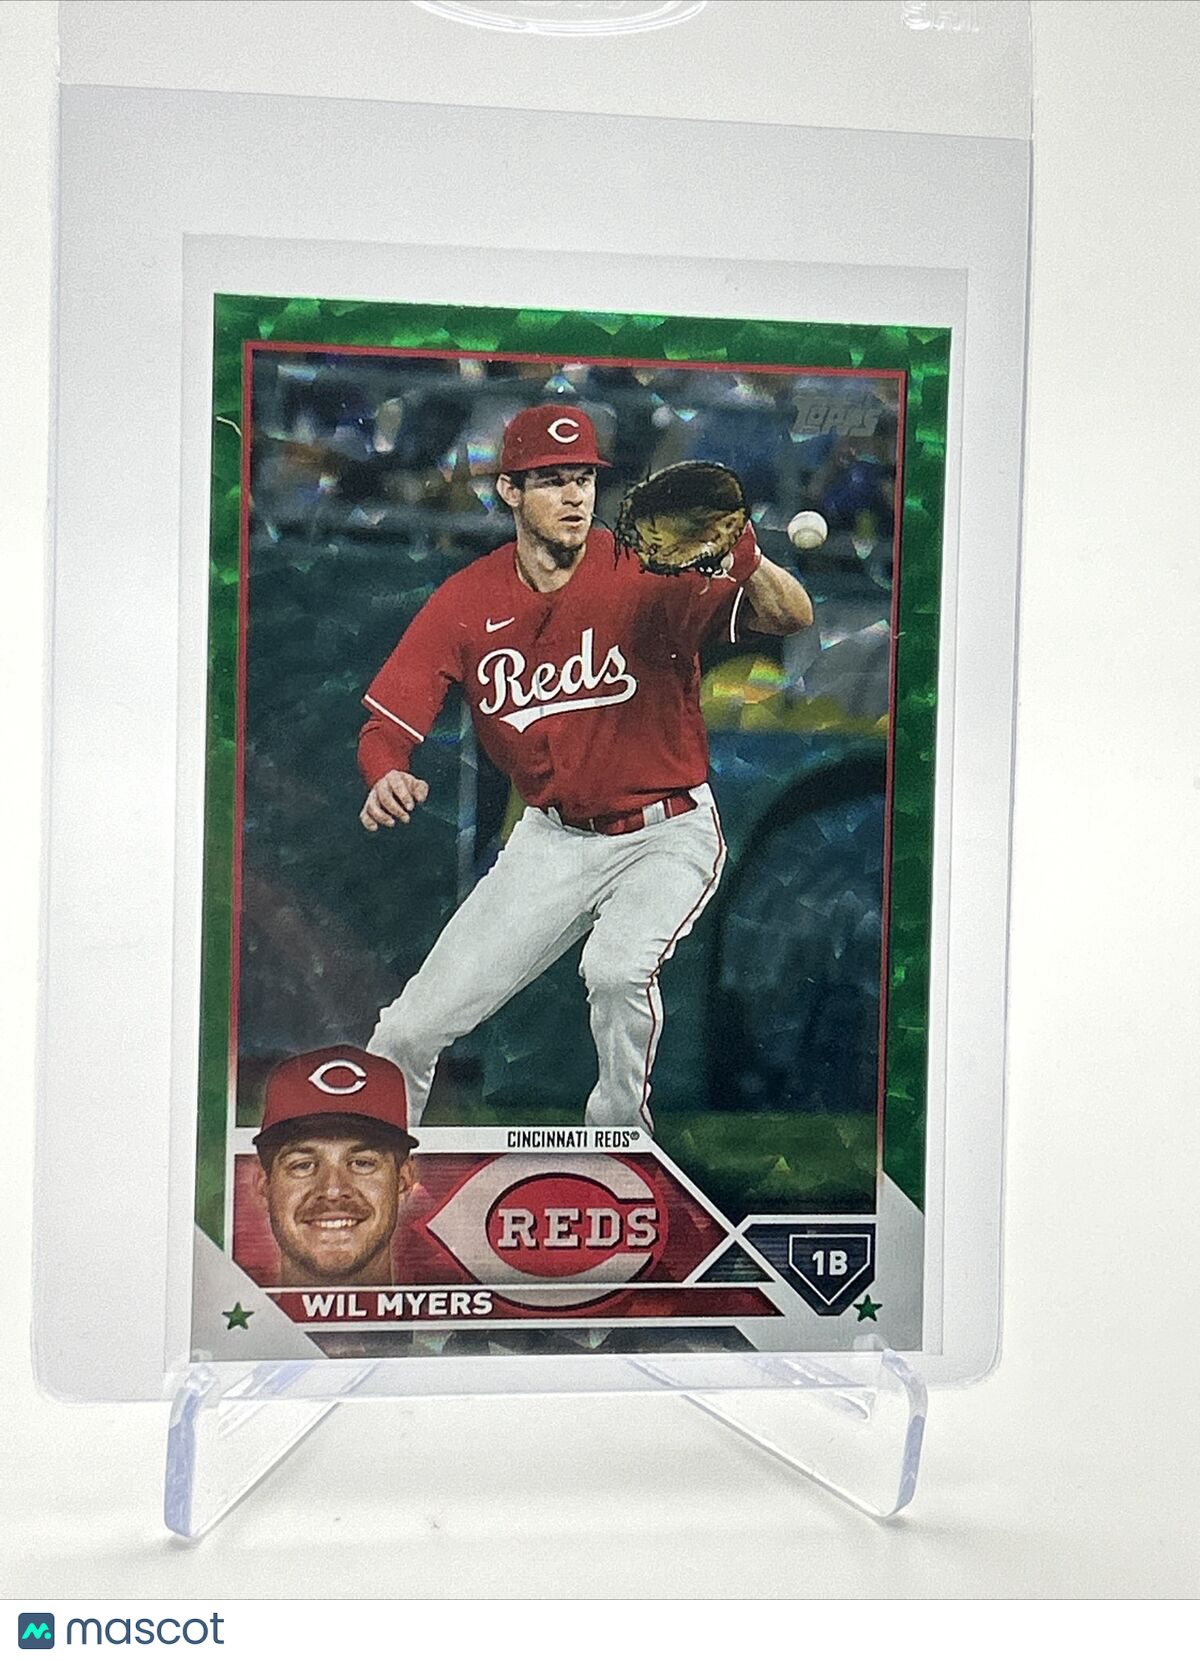 2023 Topps Green Foil Wil Myers Baseball Card #506 326/499 FREE SHIPPING